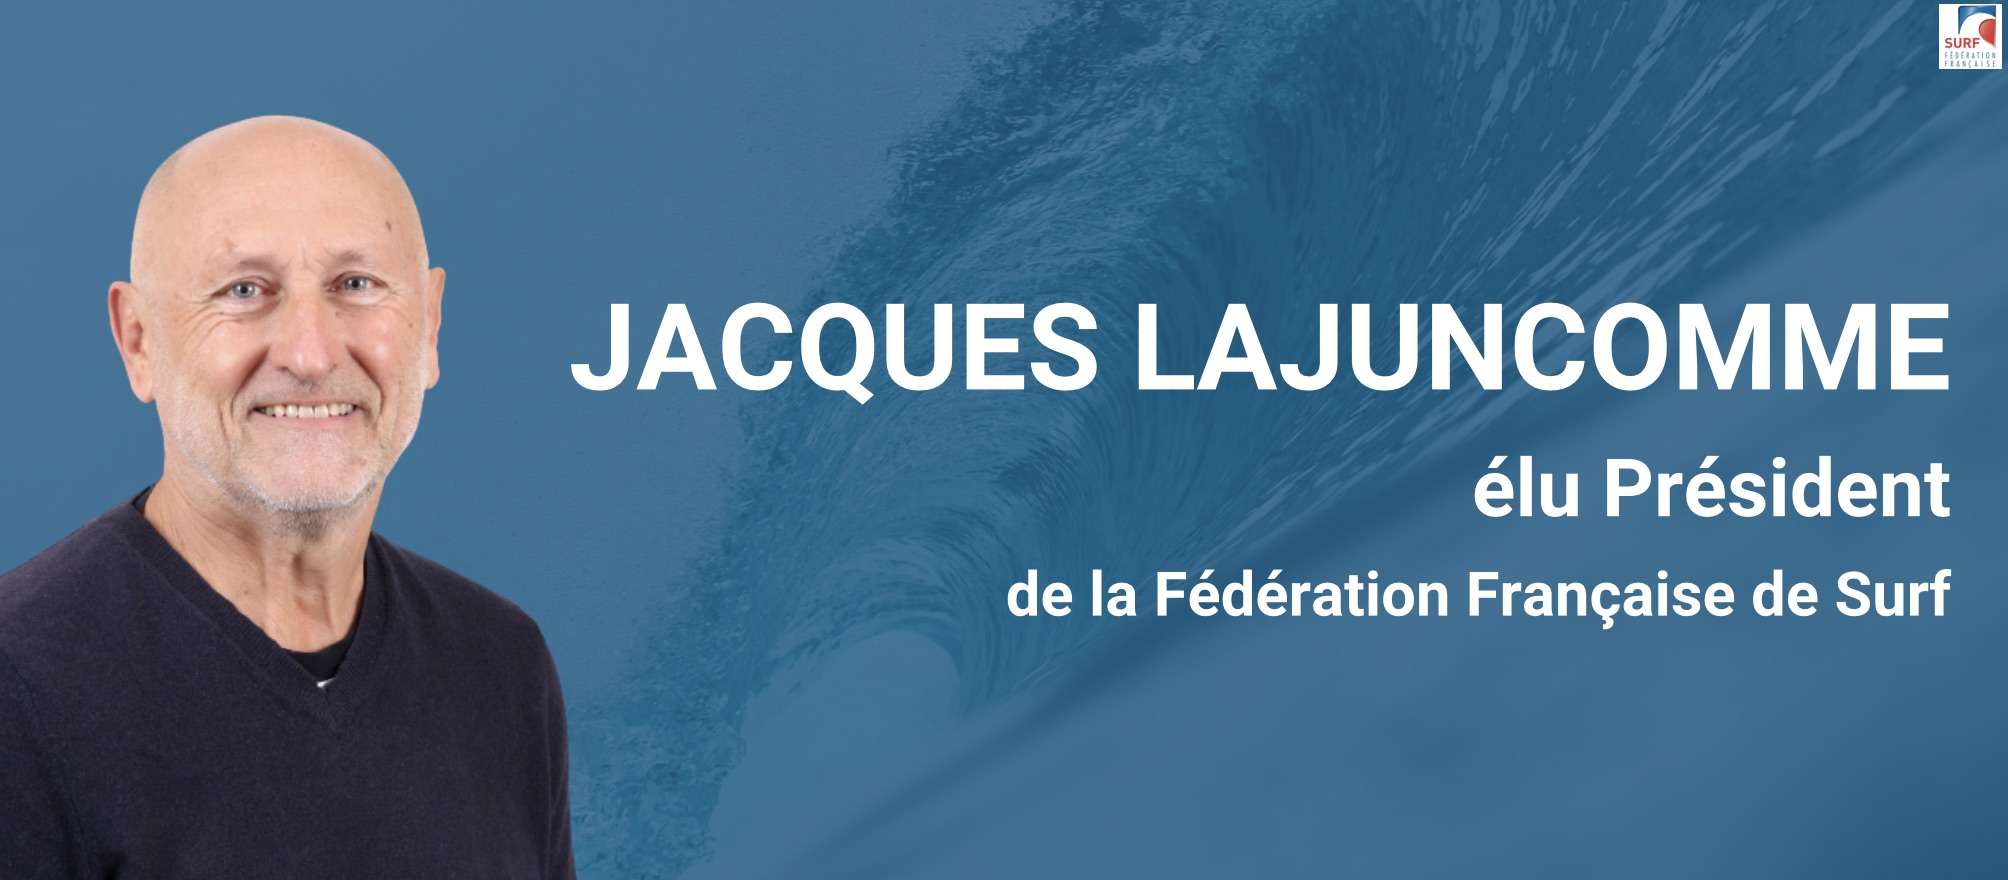 Lajuncomme elected French Surfing Federation President